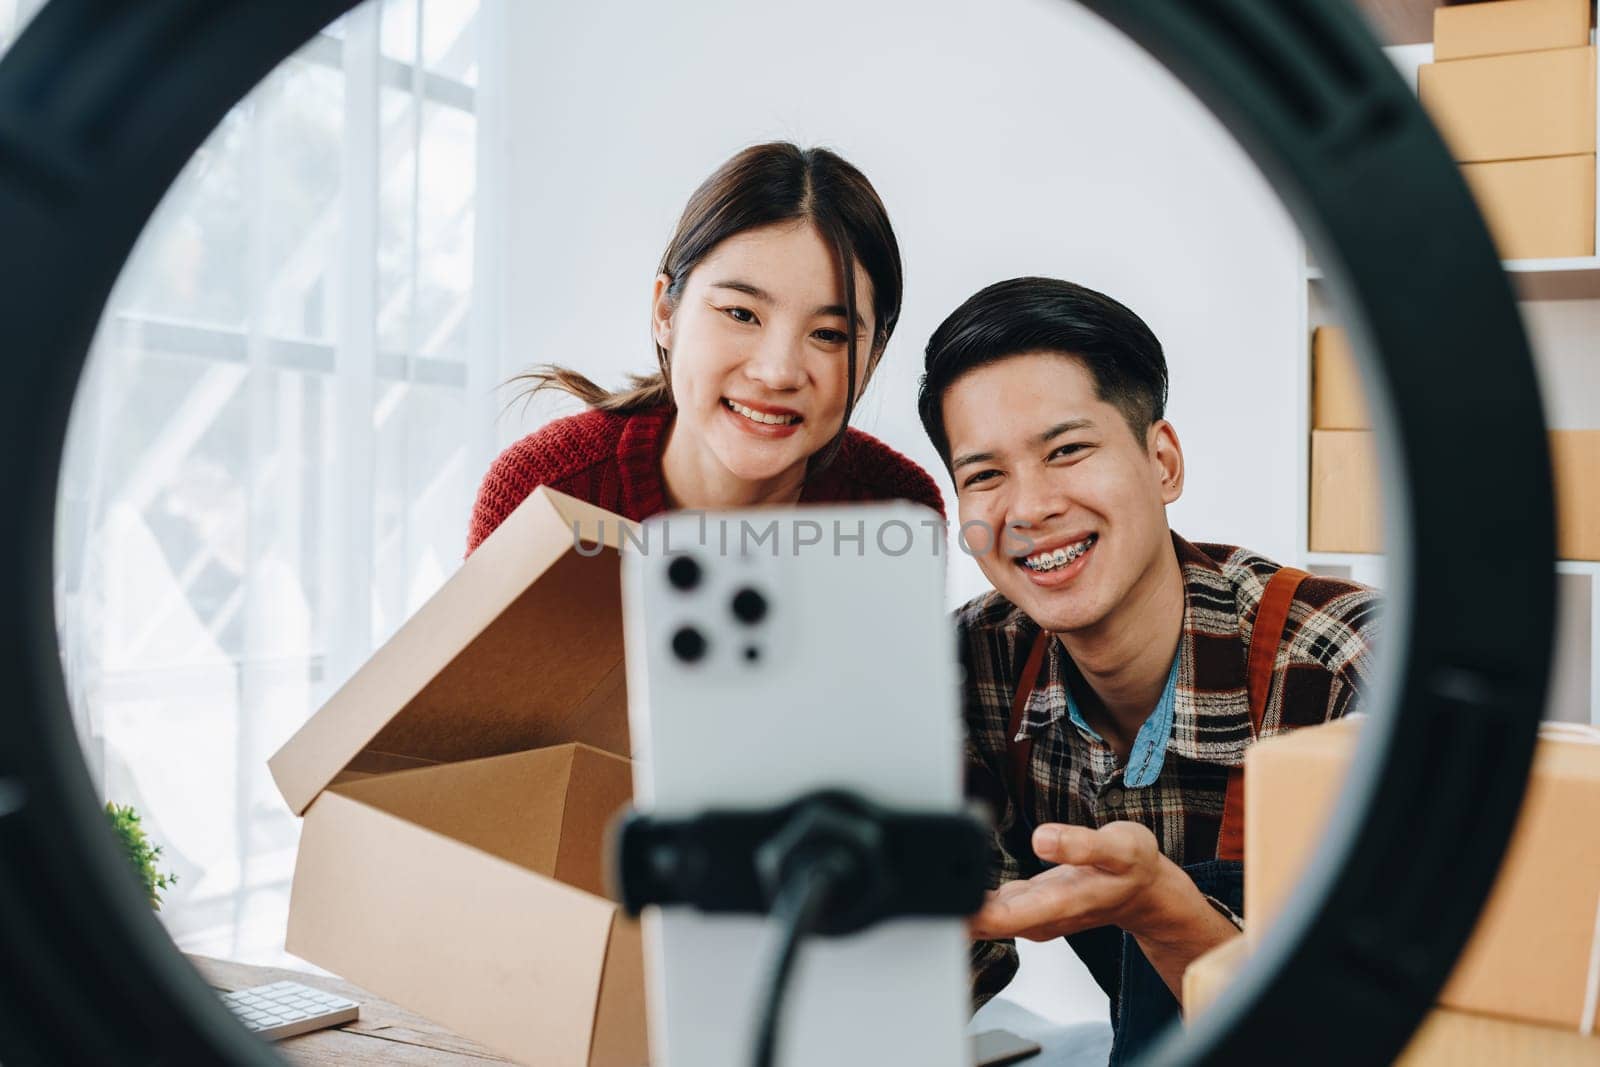 family business Asian people, vlogger, blog, presenting online products, live video, social media, record her, sell online via digital cameras by Manastrong